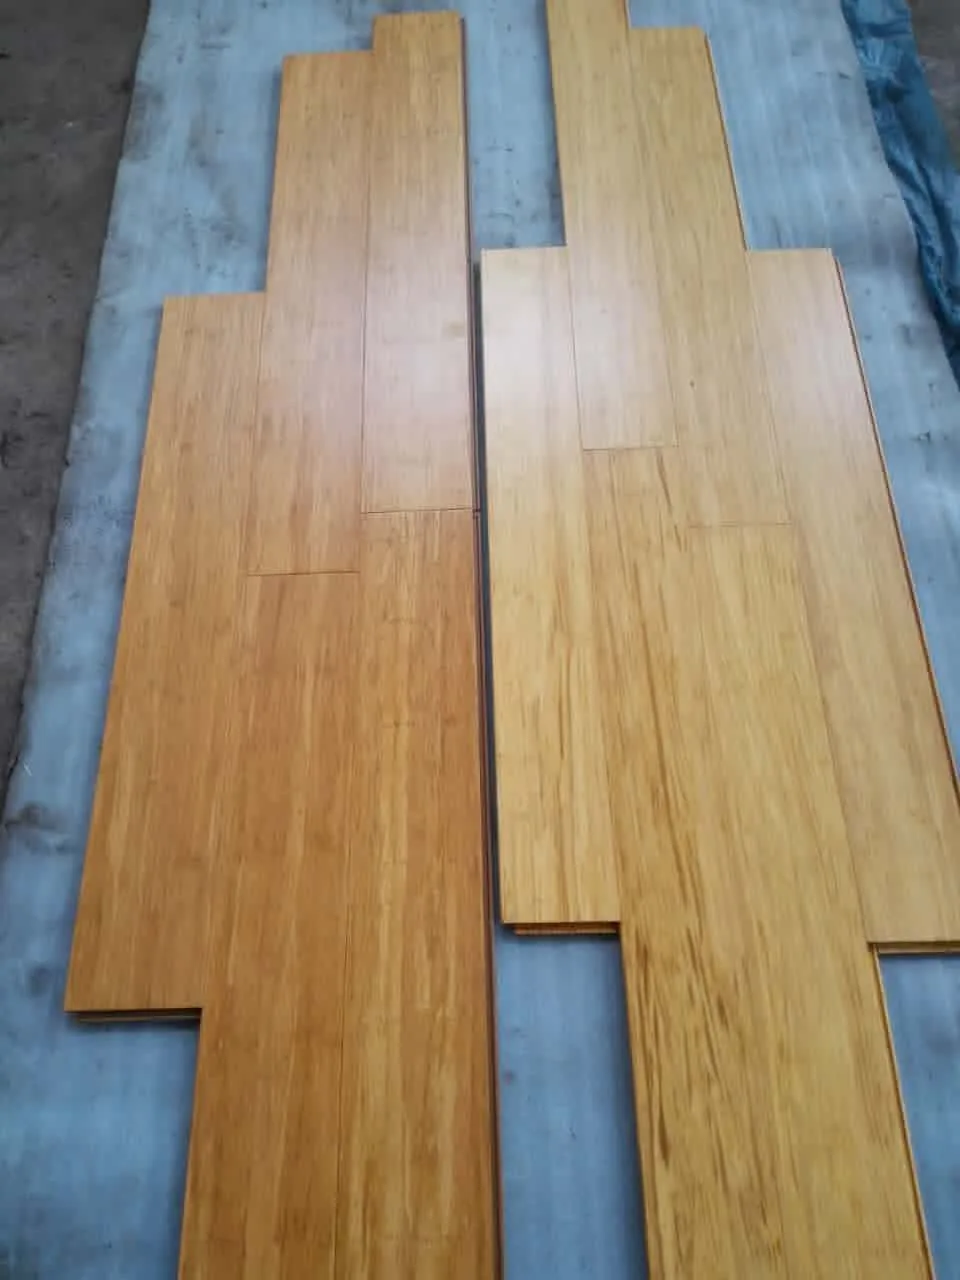 Newest Style Grey Colour Bamboo Flooring Handscraped Surface Solid